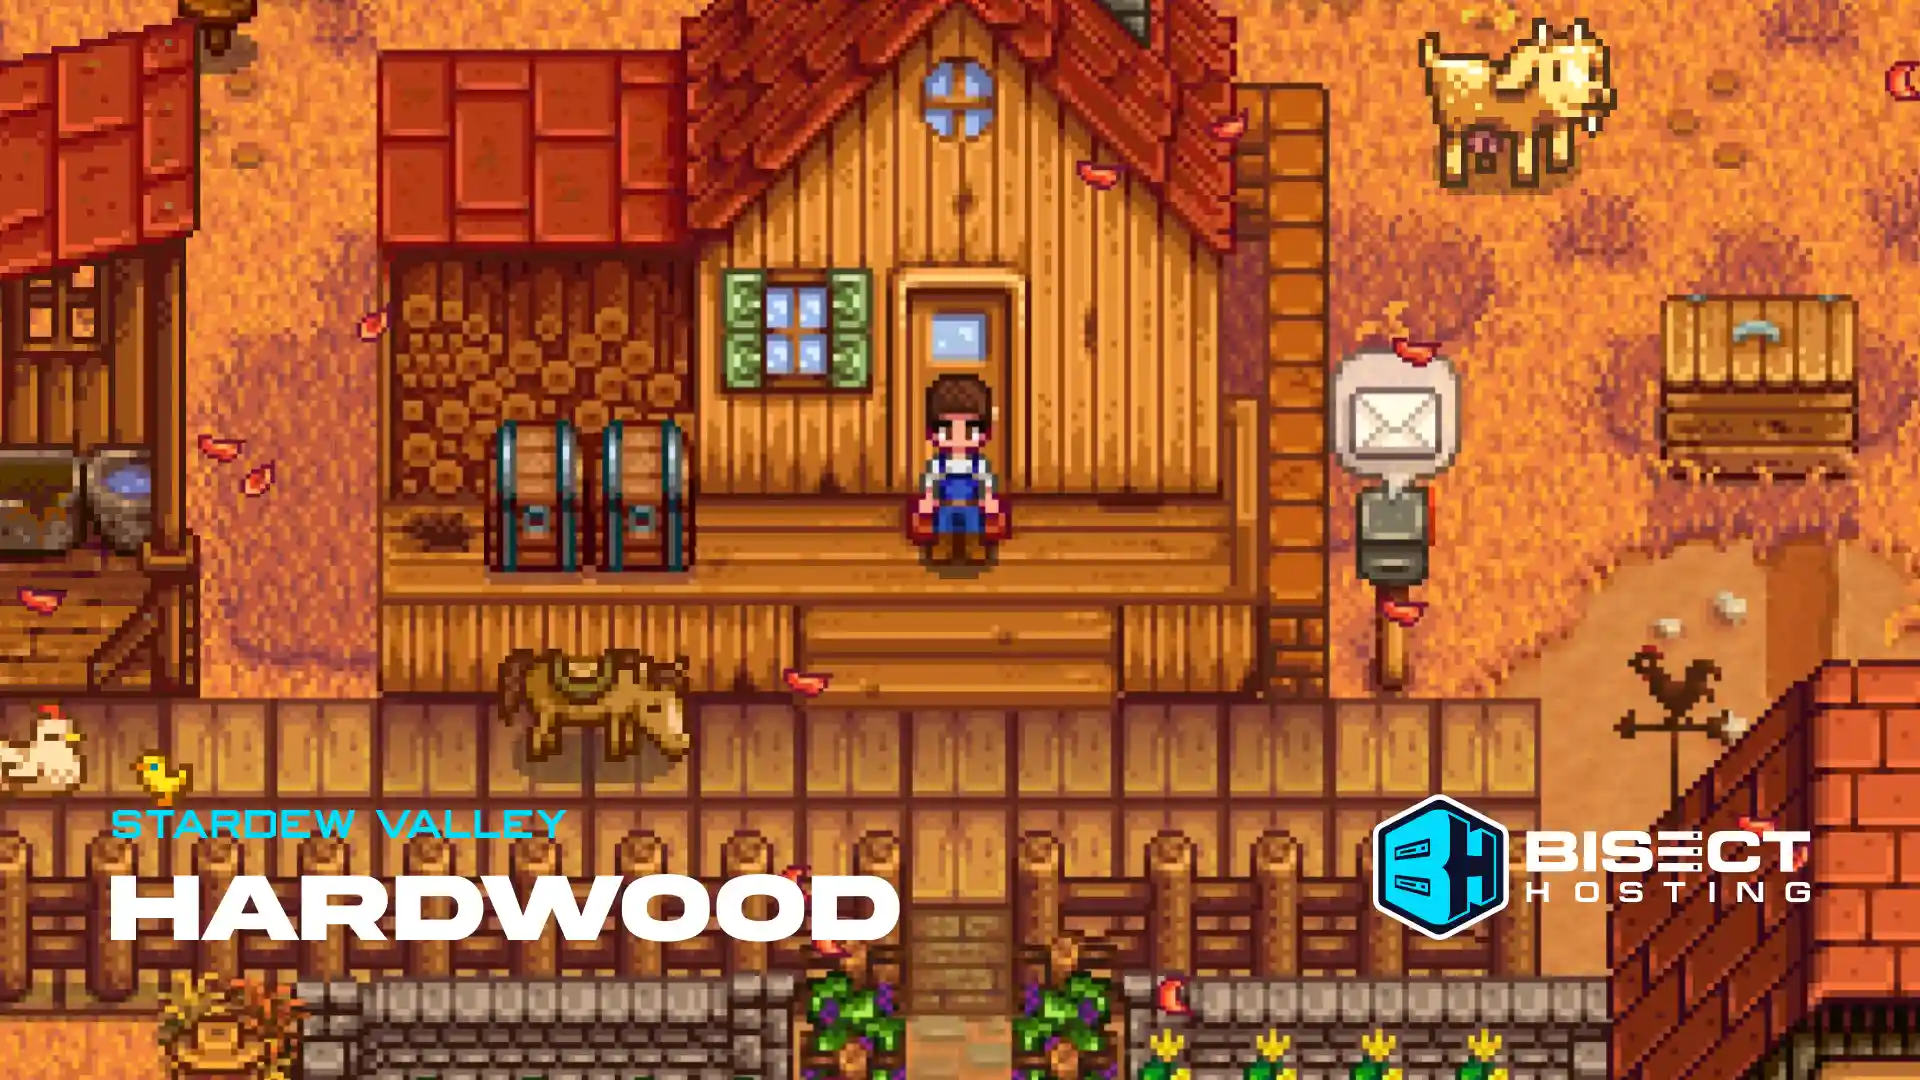 Stardew Valley Hardwood Guide: Best Locations, Vendors, & Crafting Recipes